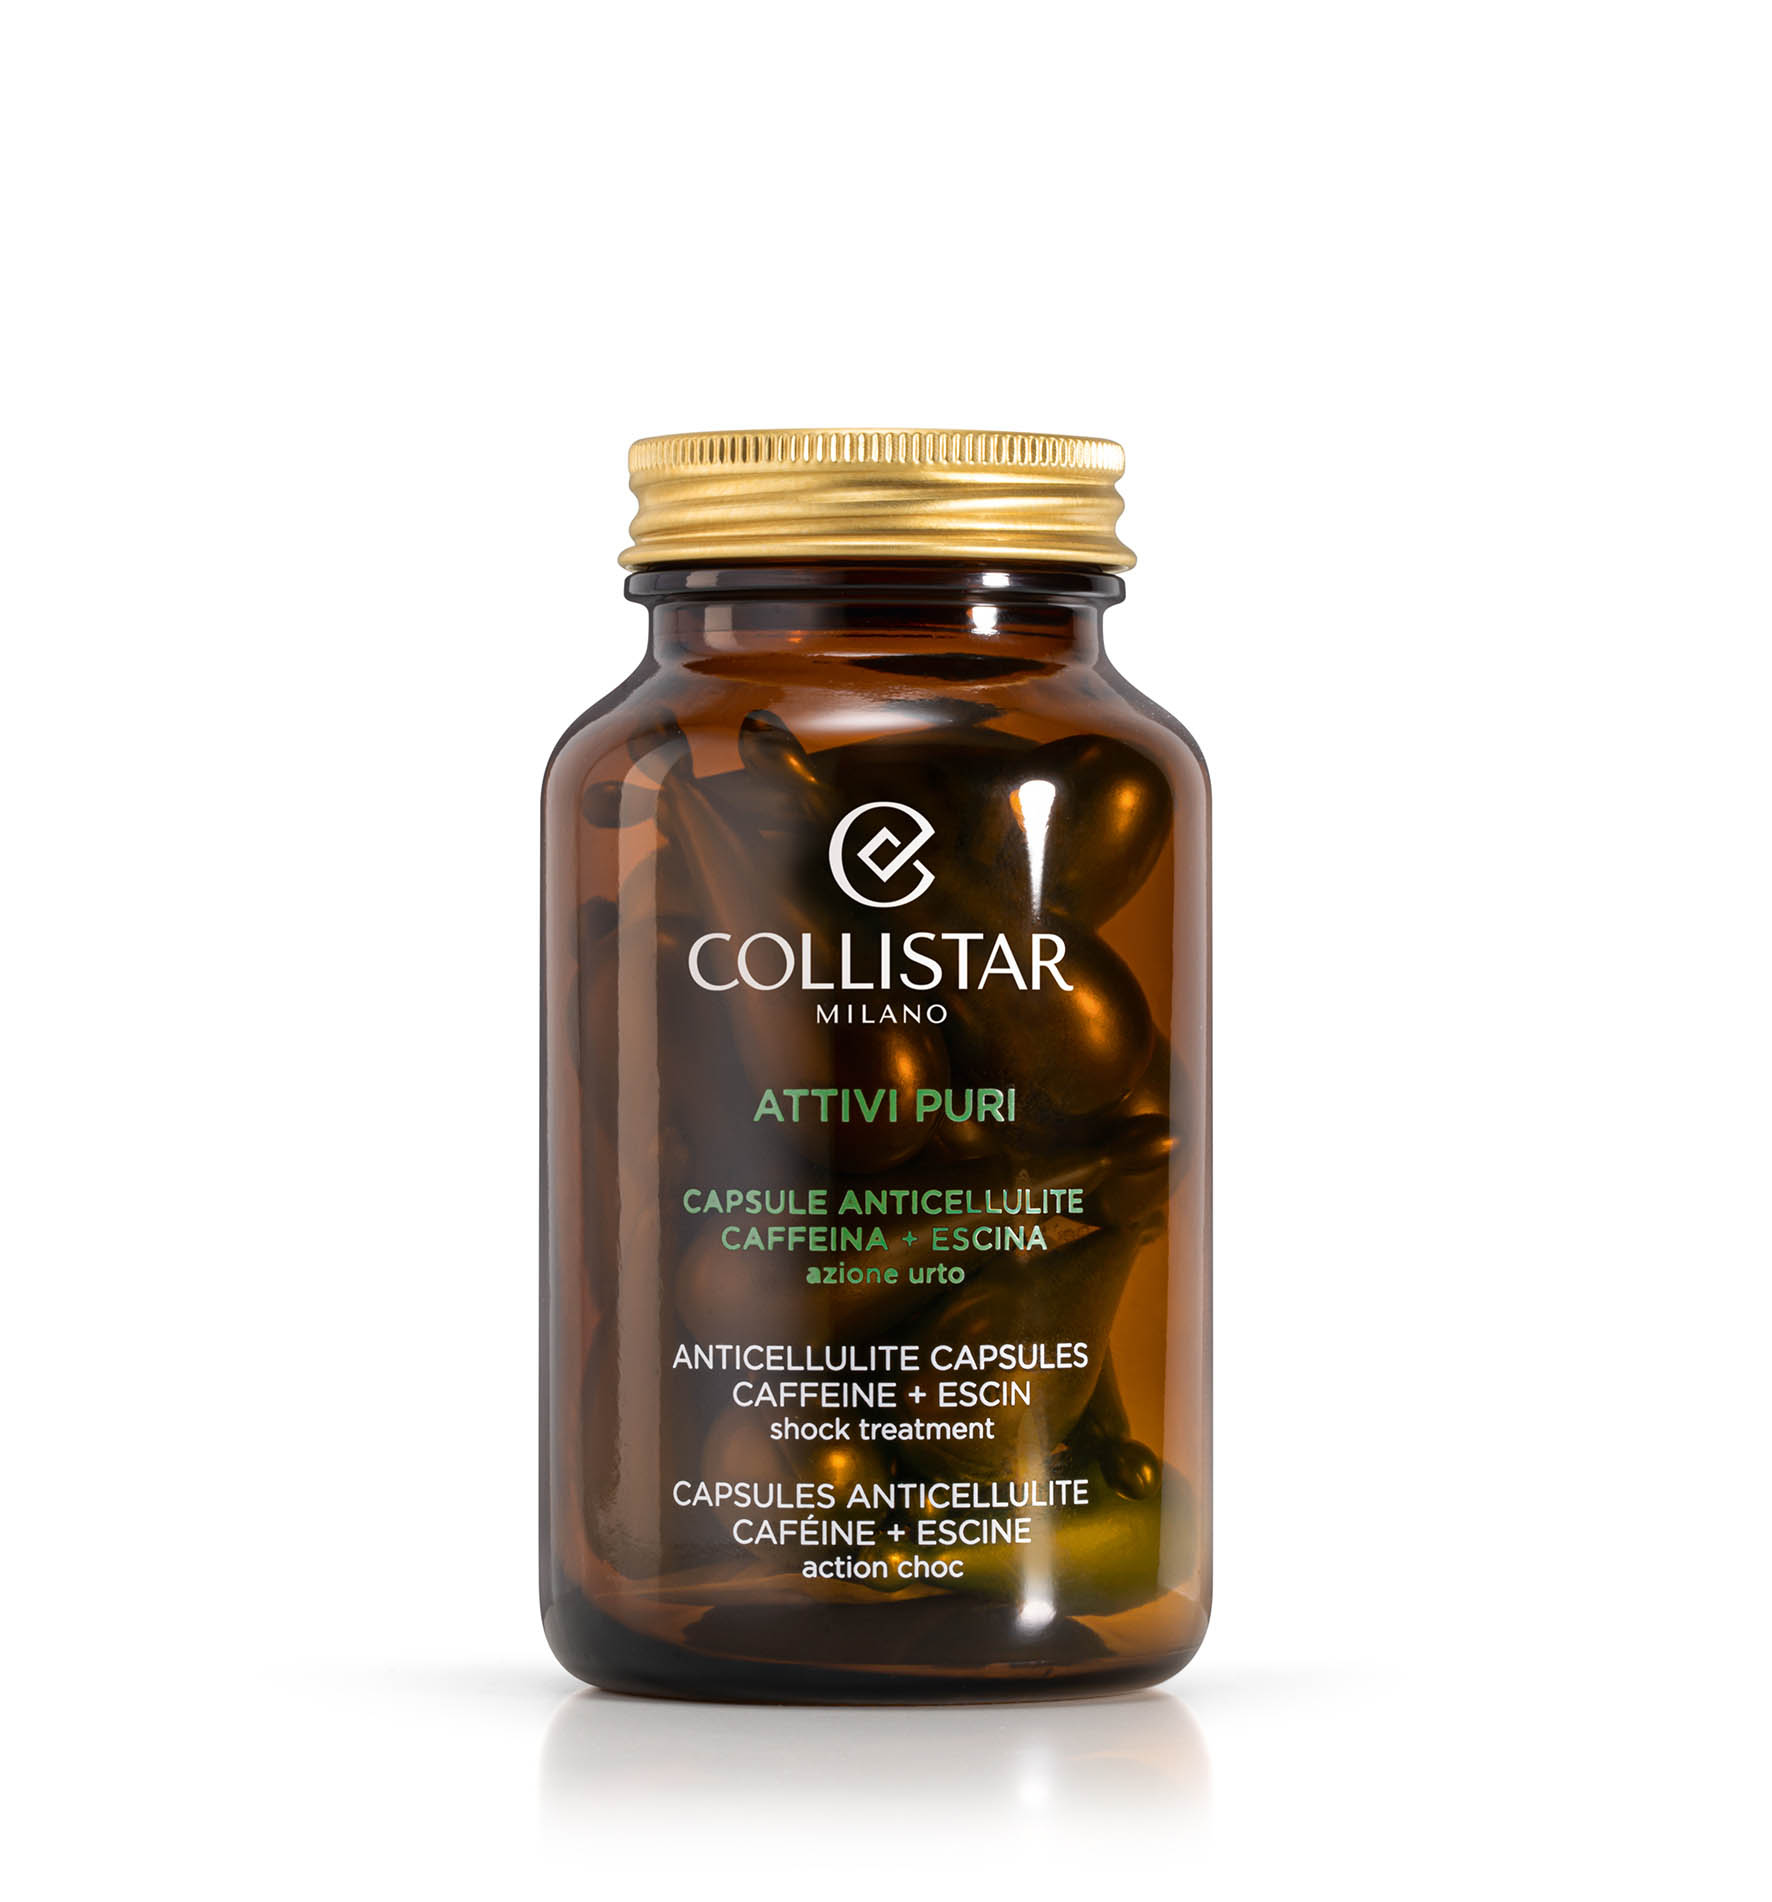 PURE ACTIVES KAPSULY ANTYCELLULITOWE - Terapia uderzeniowa | Collistar - Shop Online Ufficiale